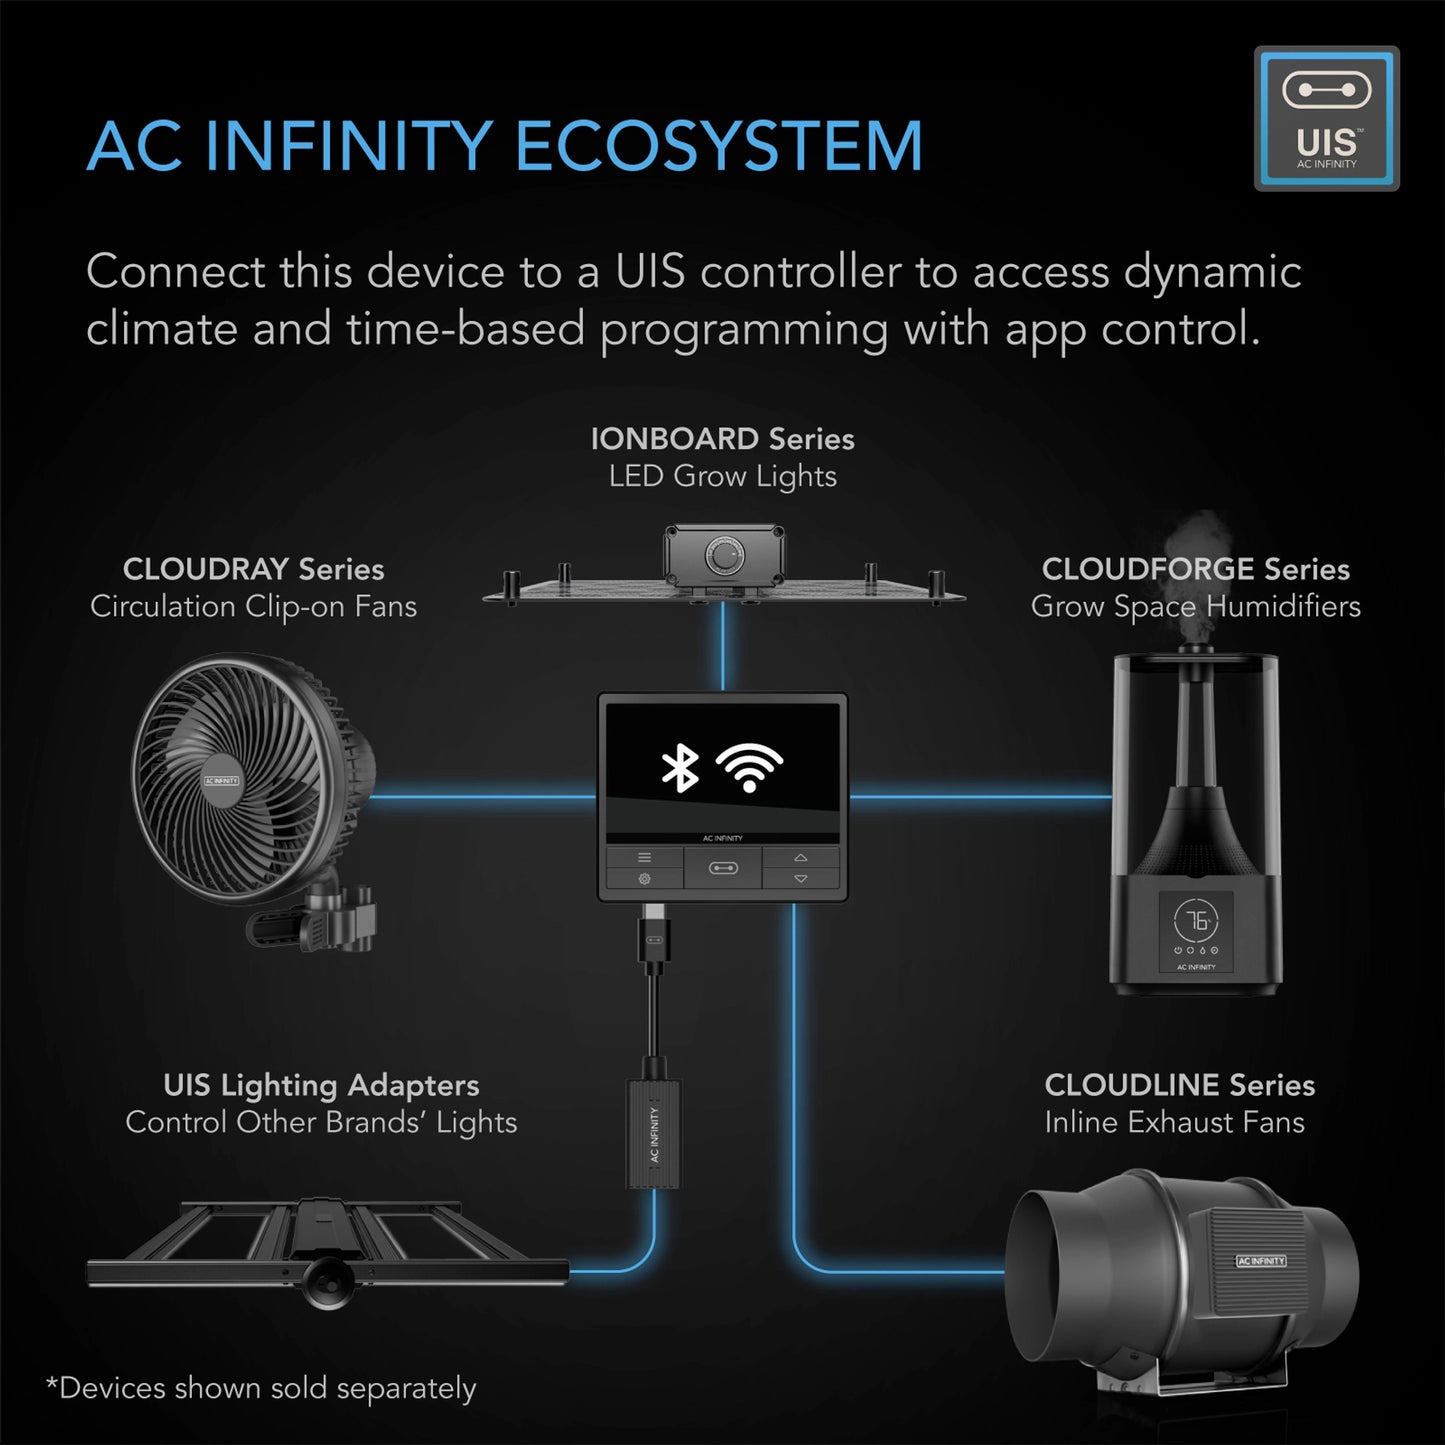 AC Infinity CLOUDFORGE Humidifiers (N/A IN ONTARIO)